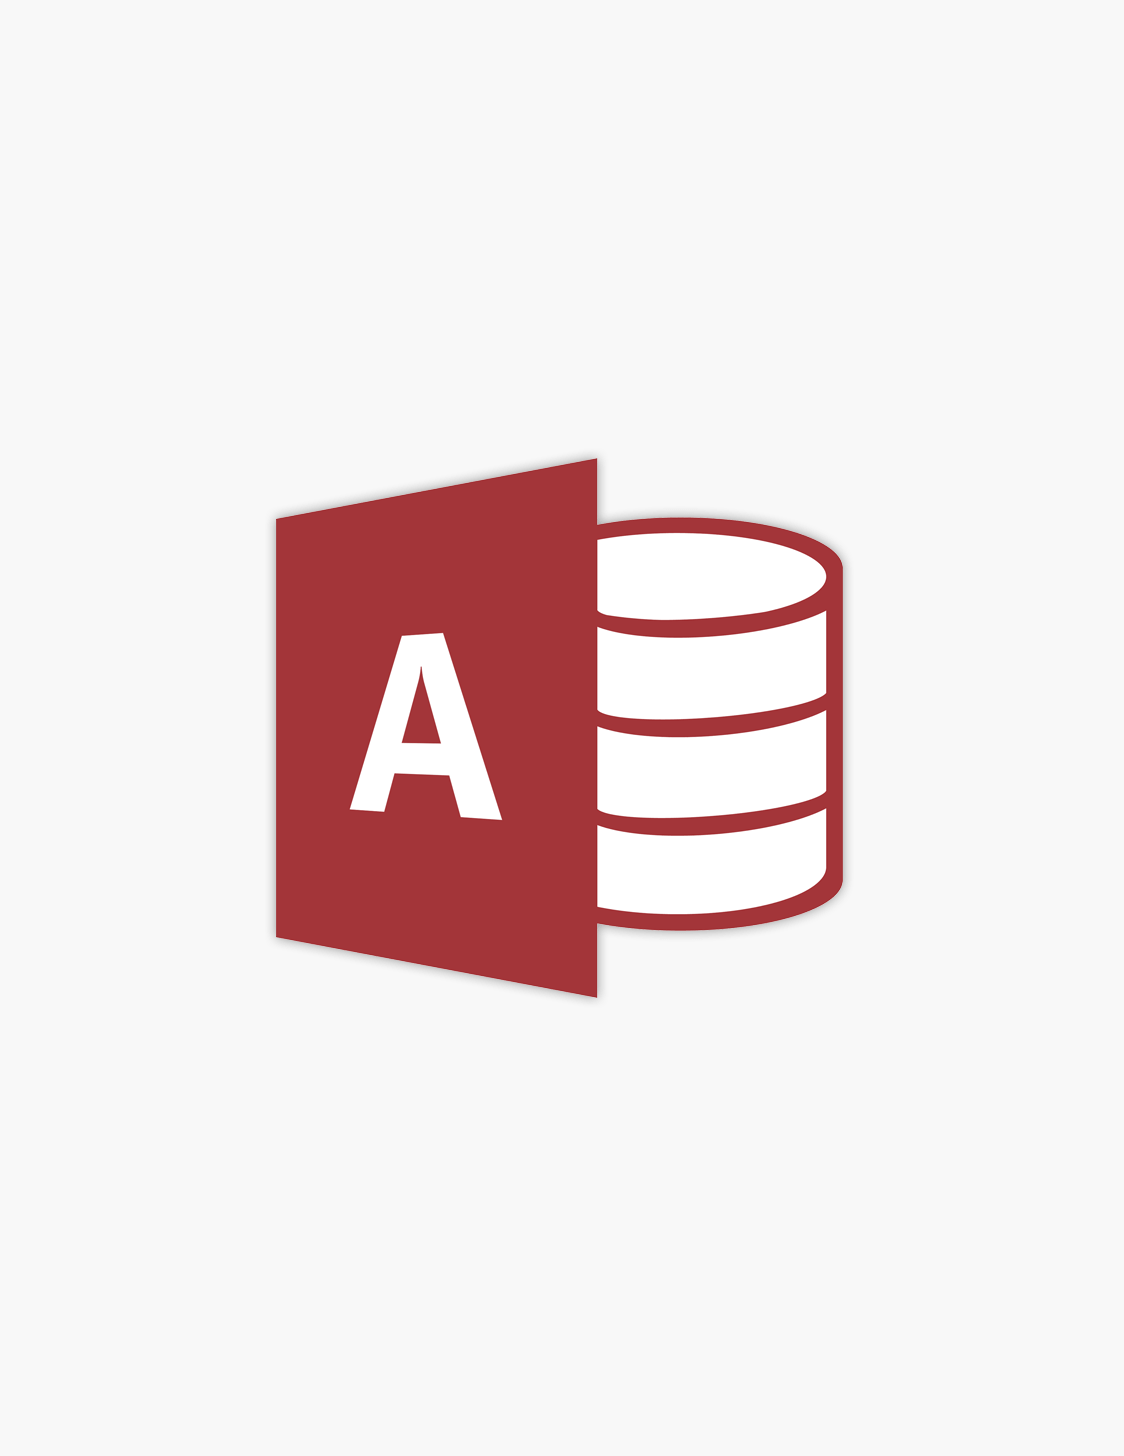 Microsoft Access 2016 . Buy Now and Instant Download